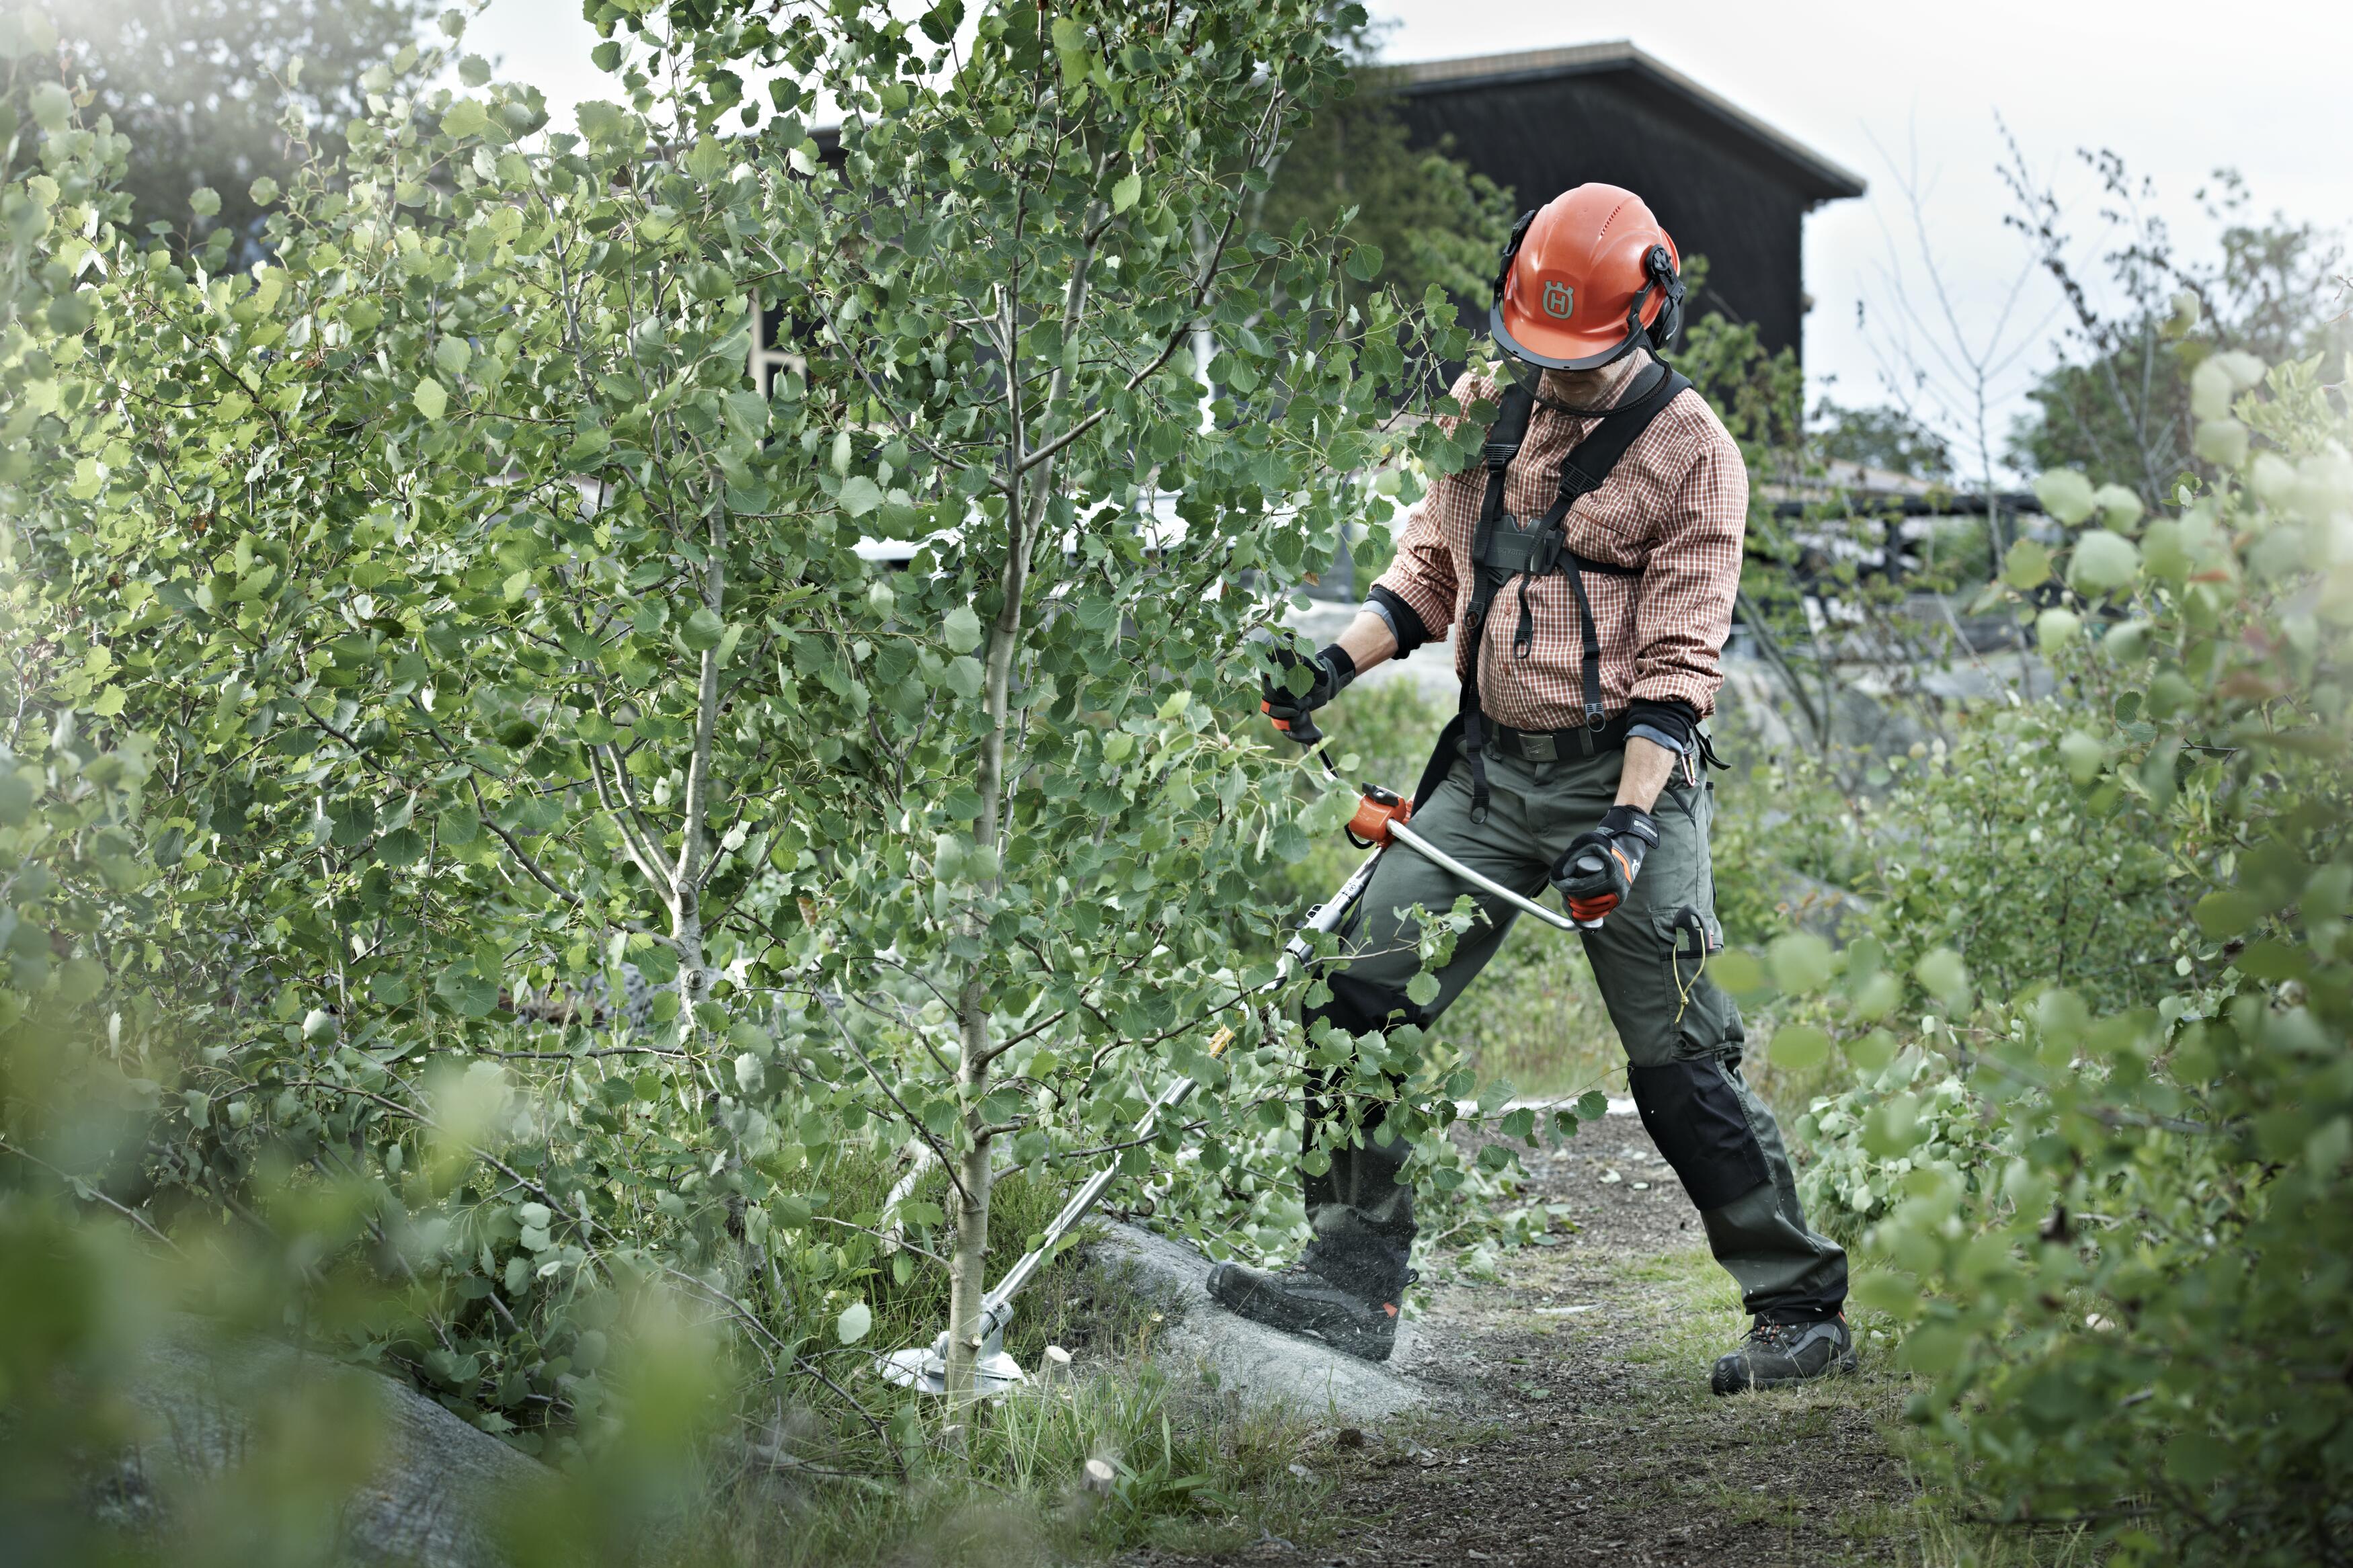 Make your brushcutter versatile by adjusting it to your task – from trimming to work in rough terrain